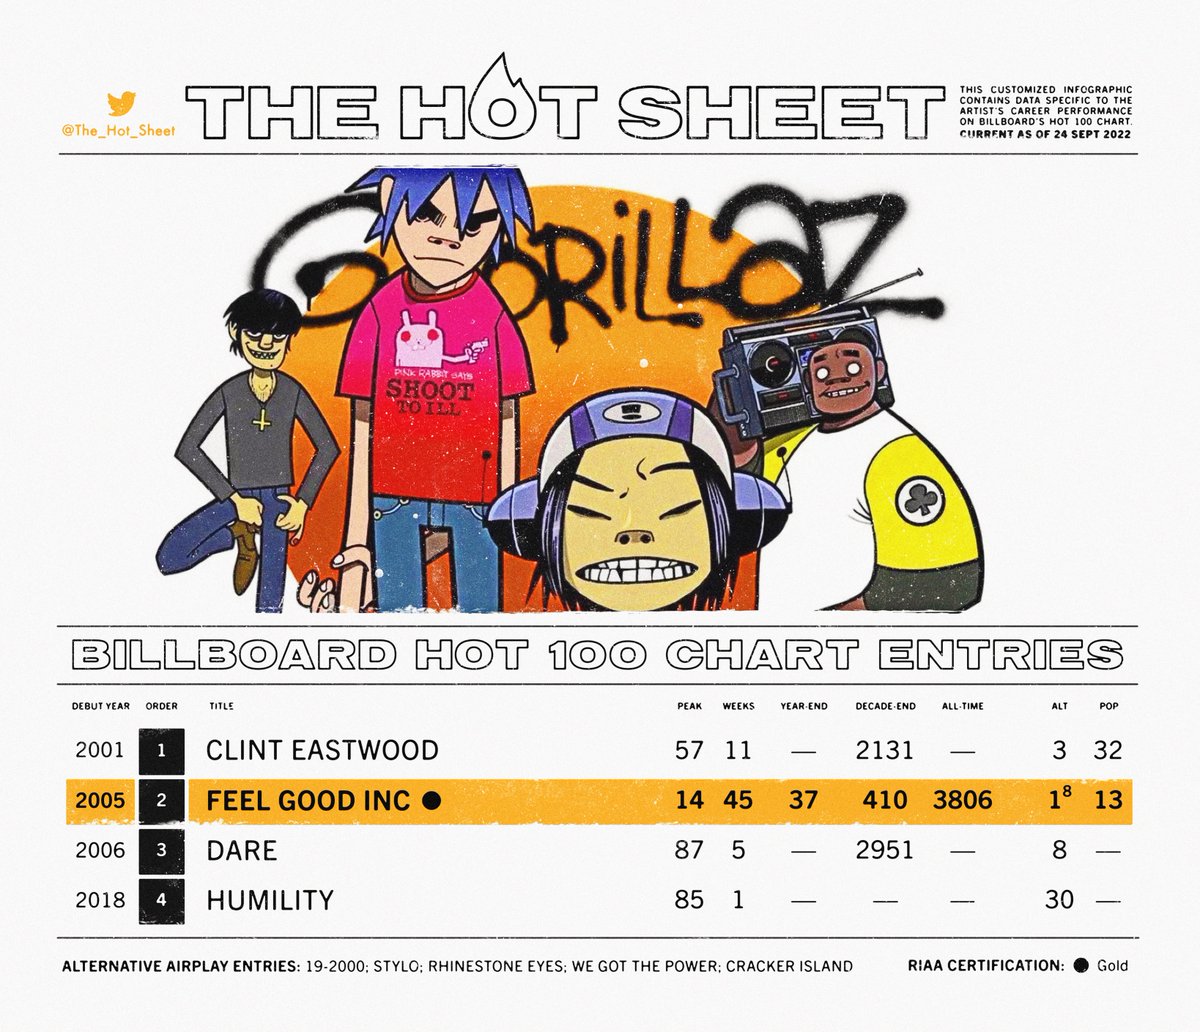 The Hot Sheet : GORILLAZ (@gorillaz) : Billboard Hot 100 Chart History : Press/hold image to view in 4K high-resolution on mobile : #gorillaz